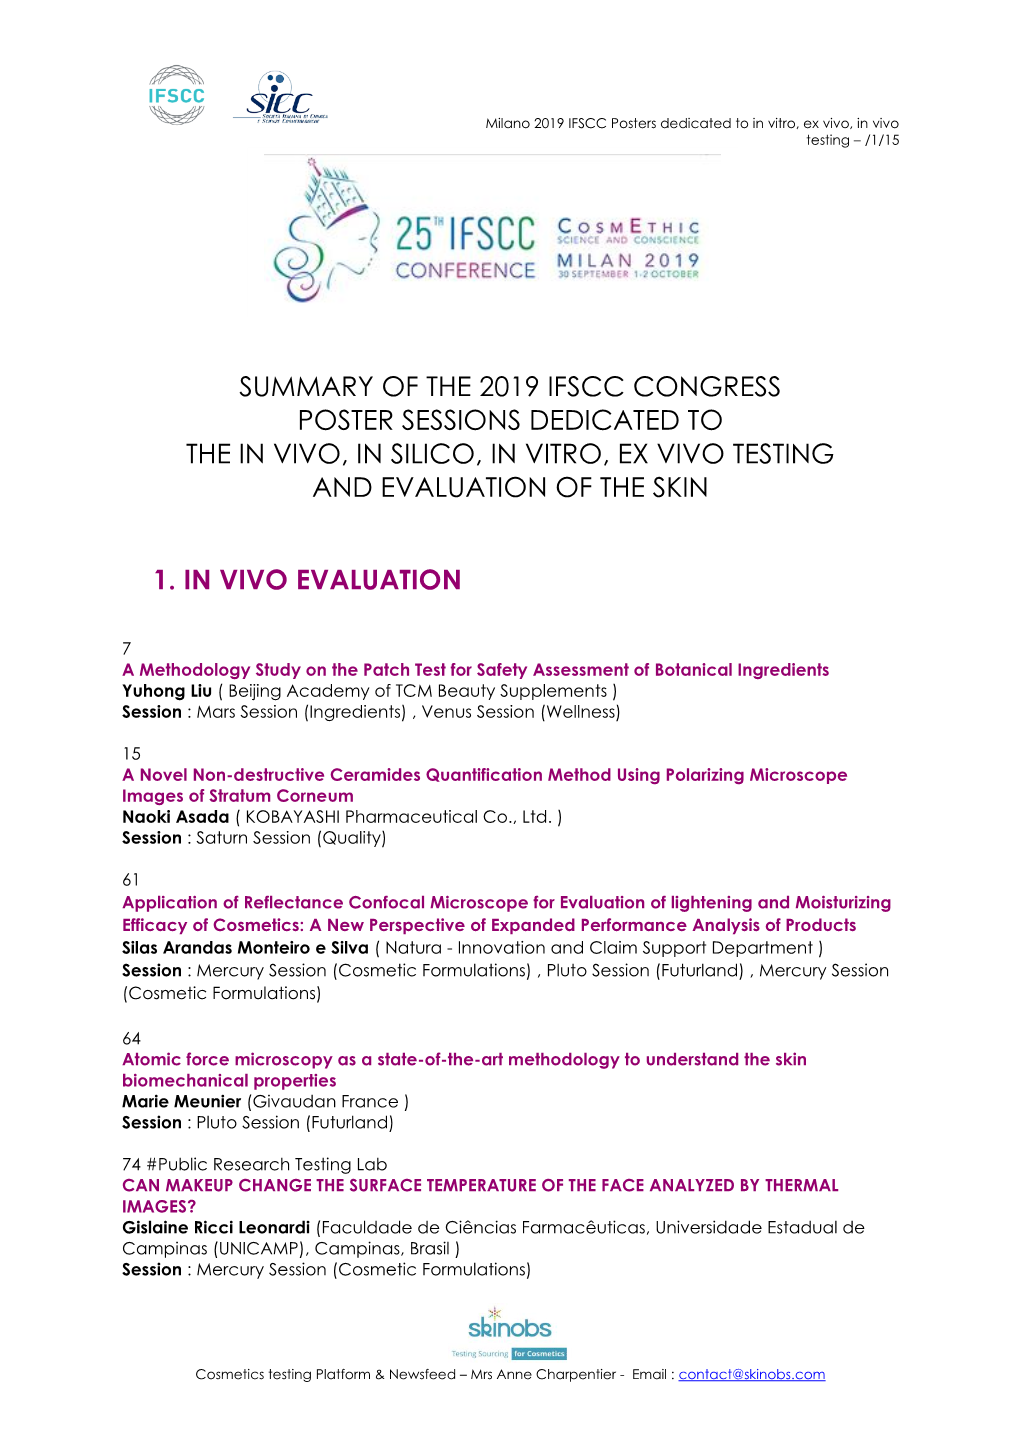 Summary of the 2019 Ifscc Congress Poster Sessions Dedicated to the in Vivo, in Silico, in Vitro, Ex Vivo Testing and Evaluation of the Skin